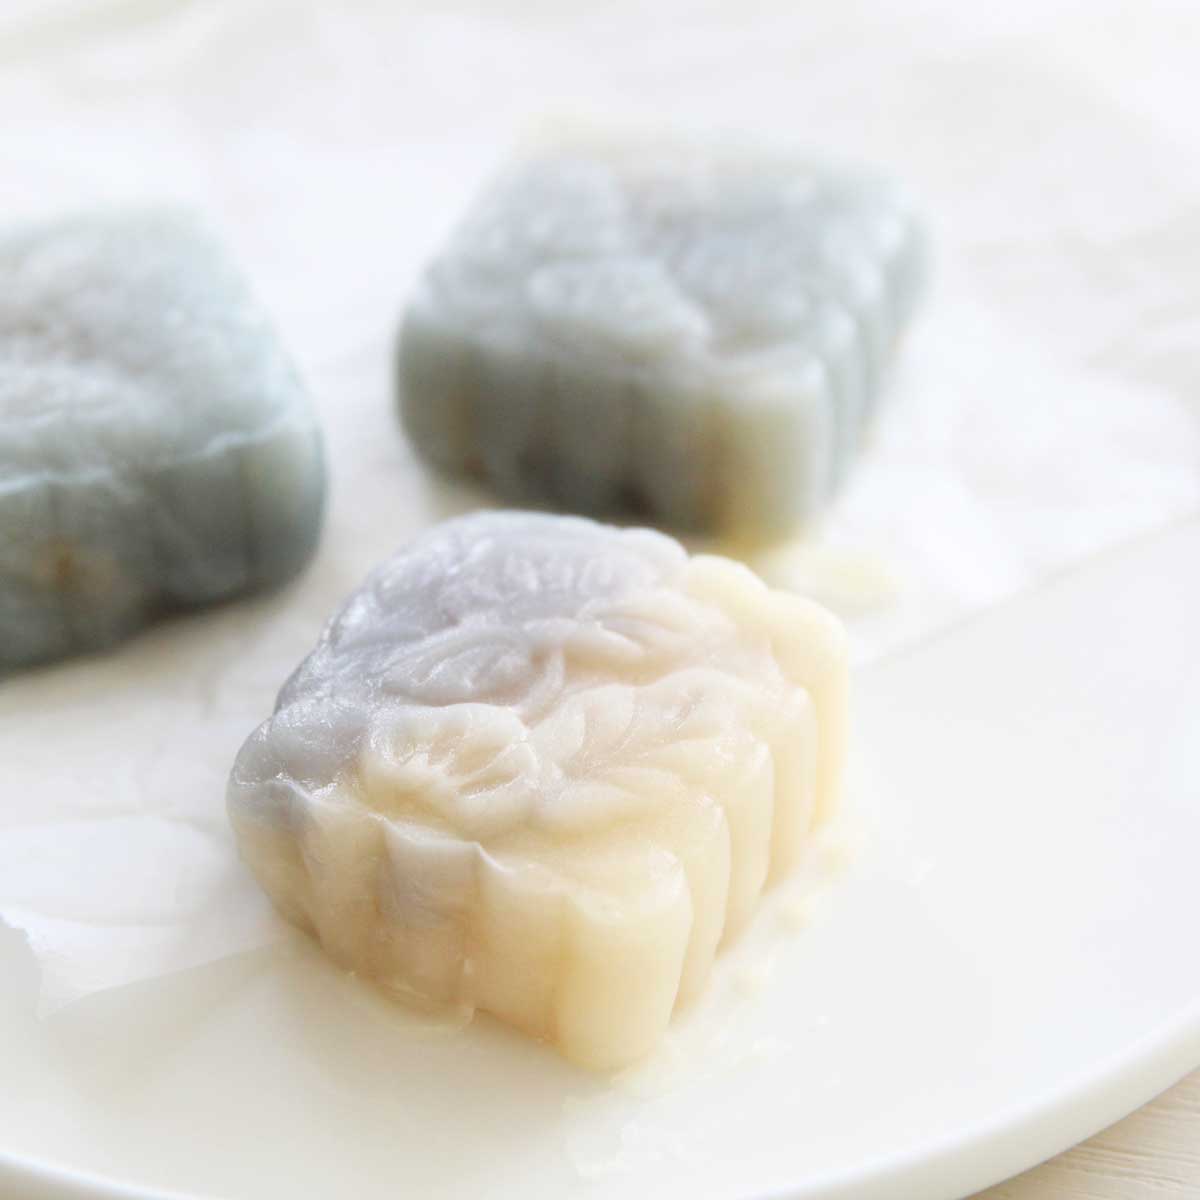 10 Minute Butterfly Pea Snowskin Mooncakes (No Steaming Required!) - Ube Mochi Cake